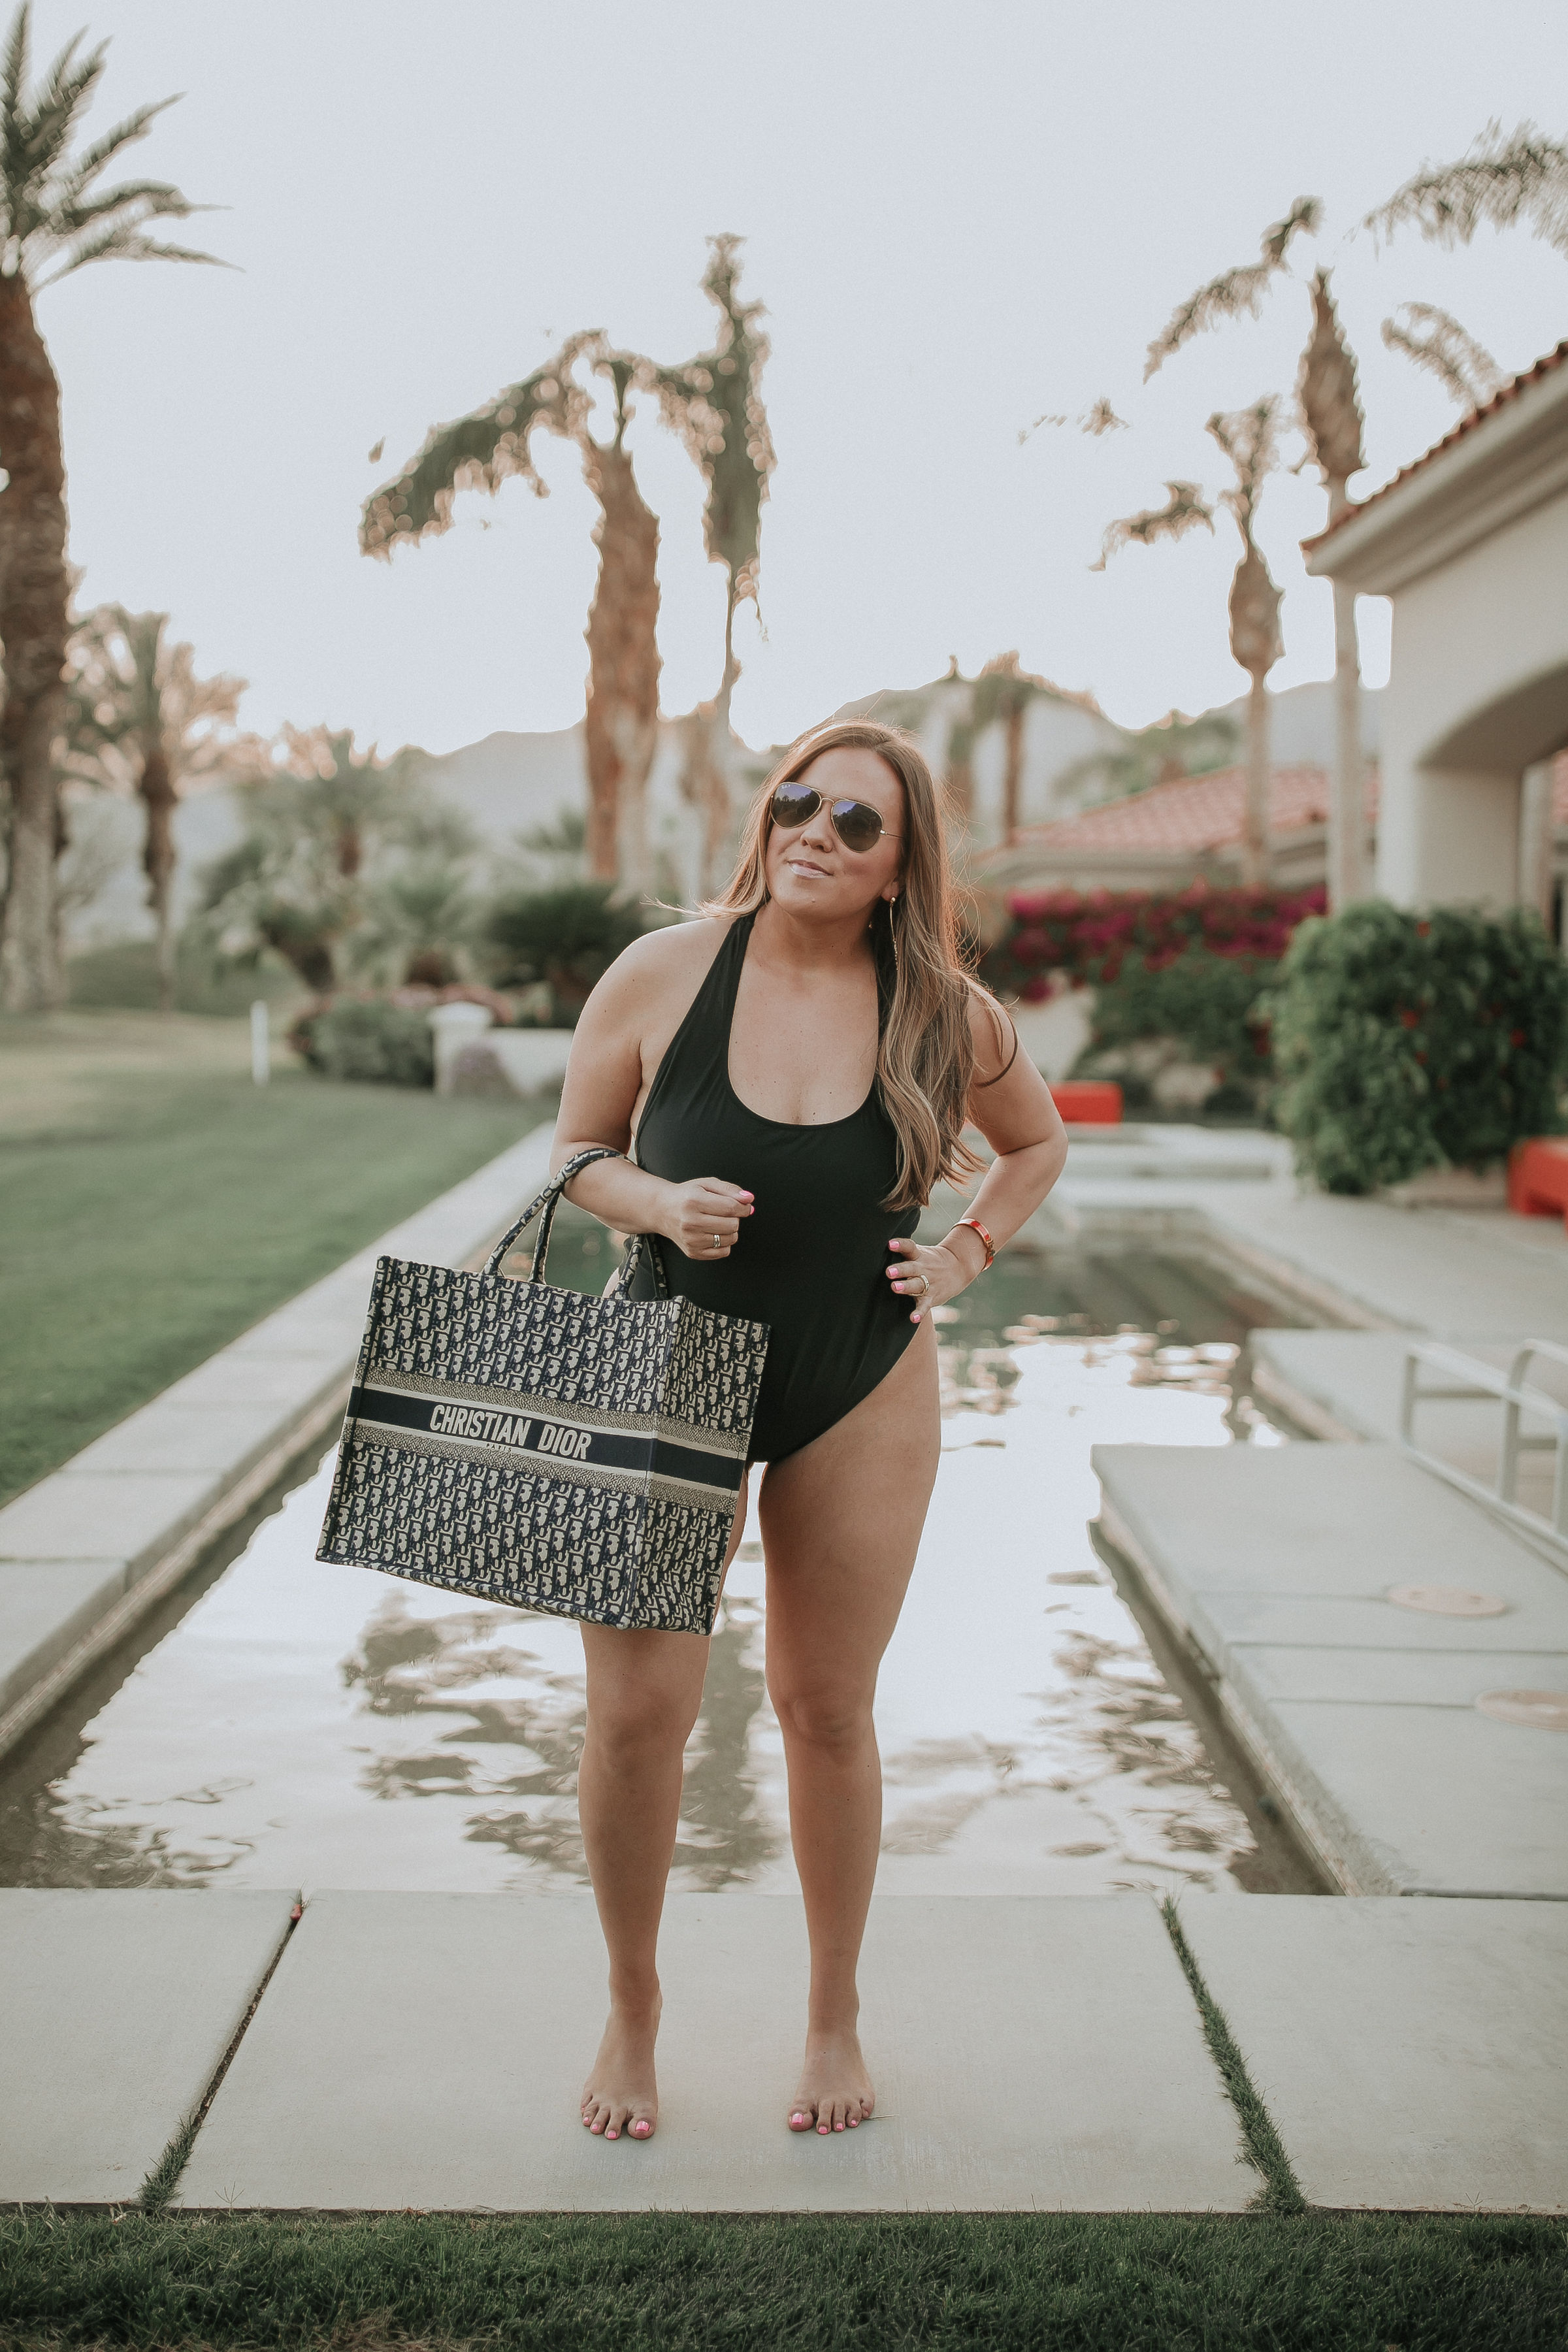 San Francisco blogger Ashley Zeal from Two Peas in a Prada shares affordable swimsuits for all body types. She is sharing the most flattering styles at a great price!